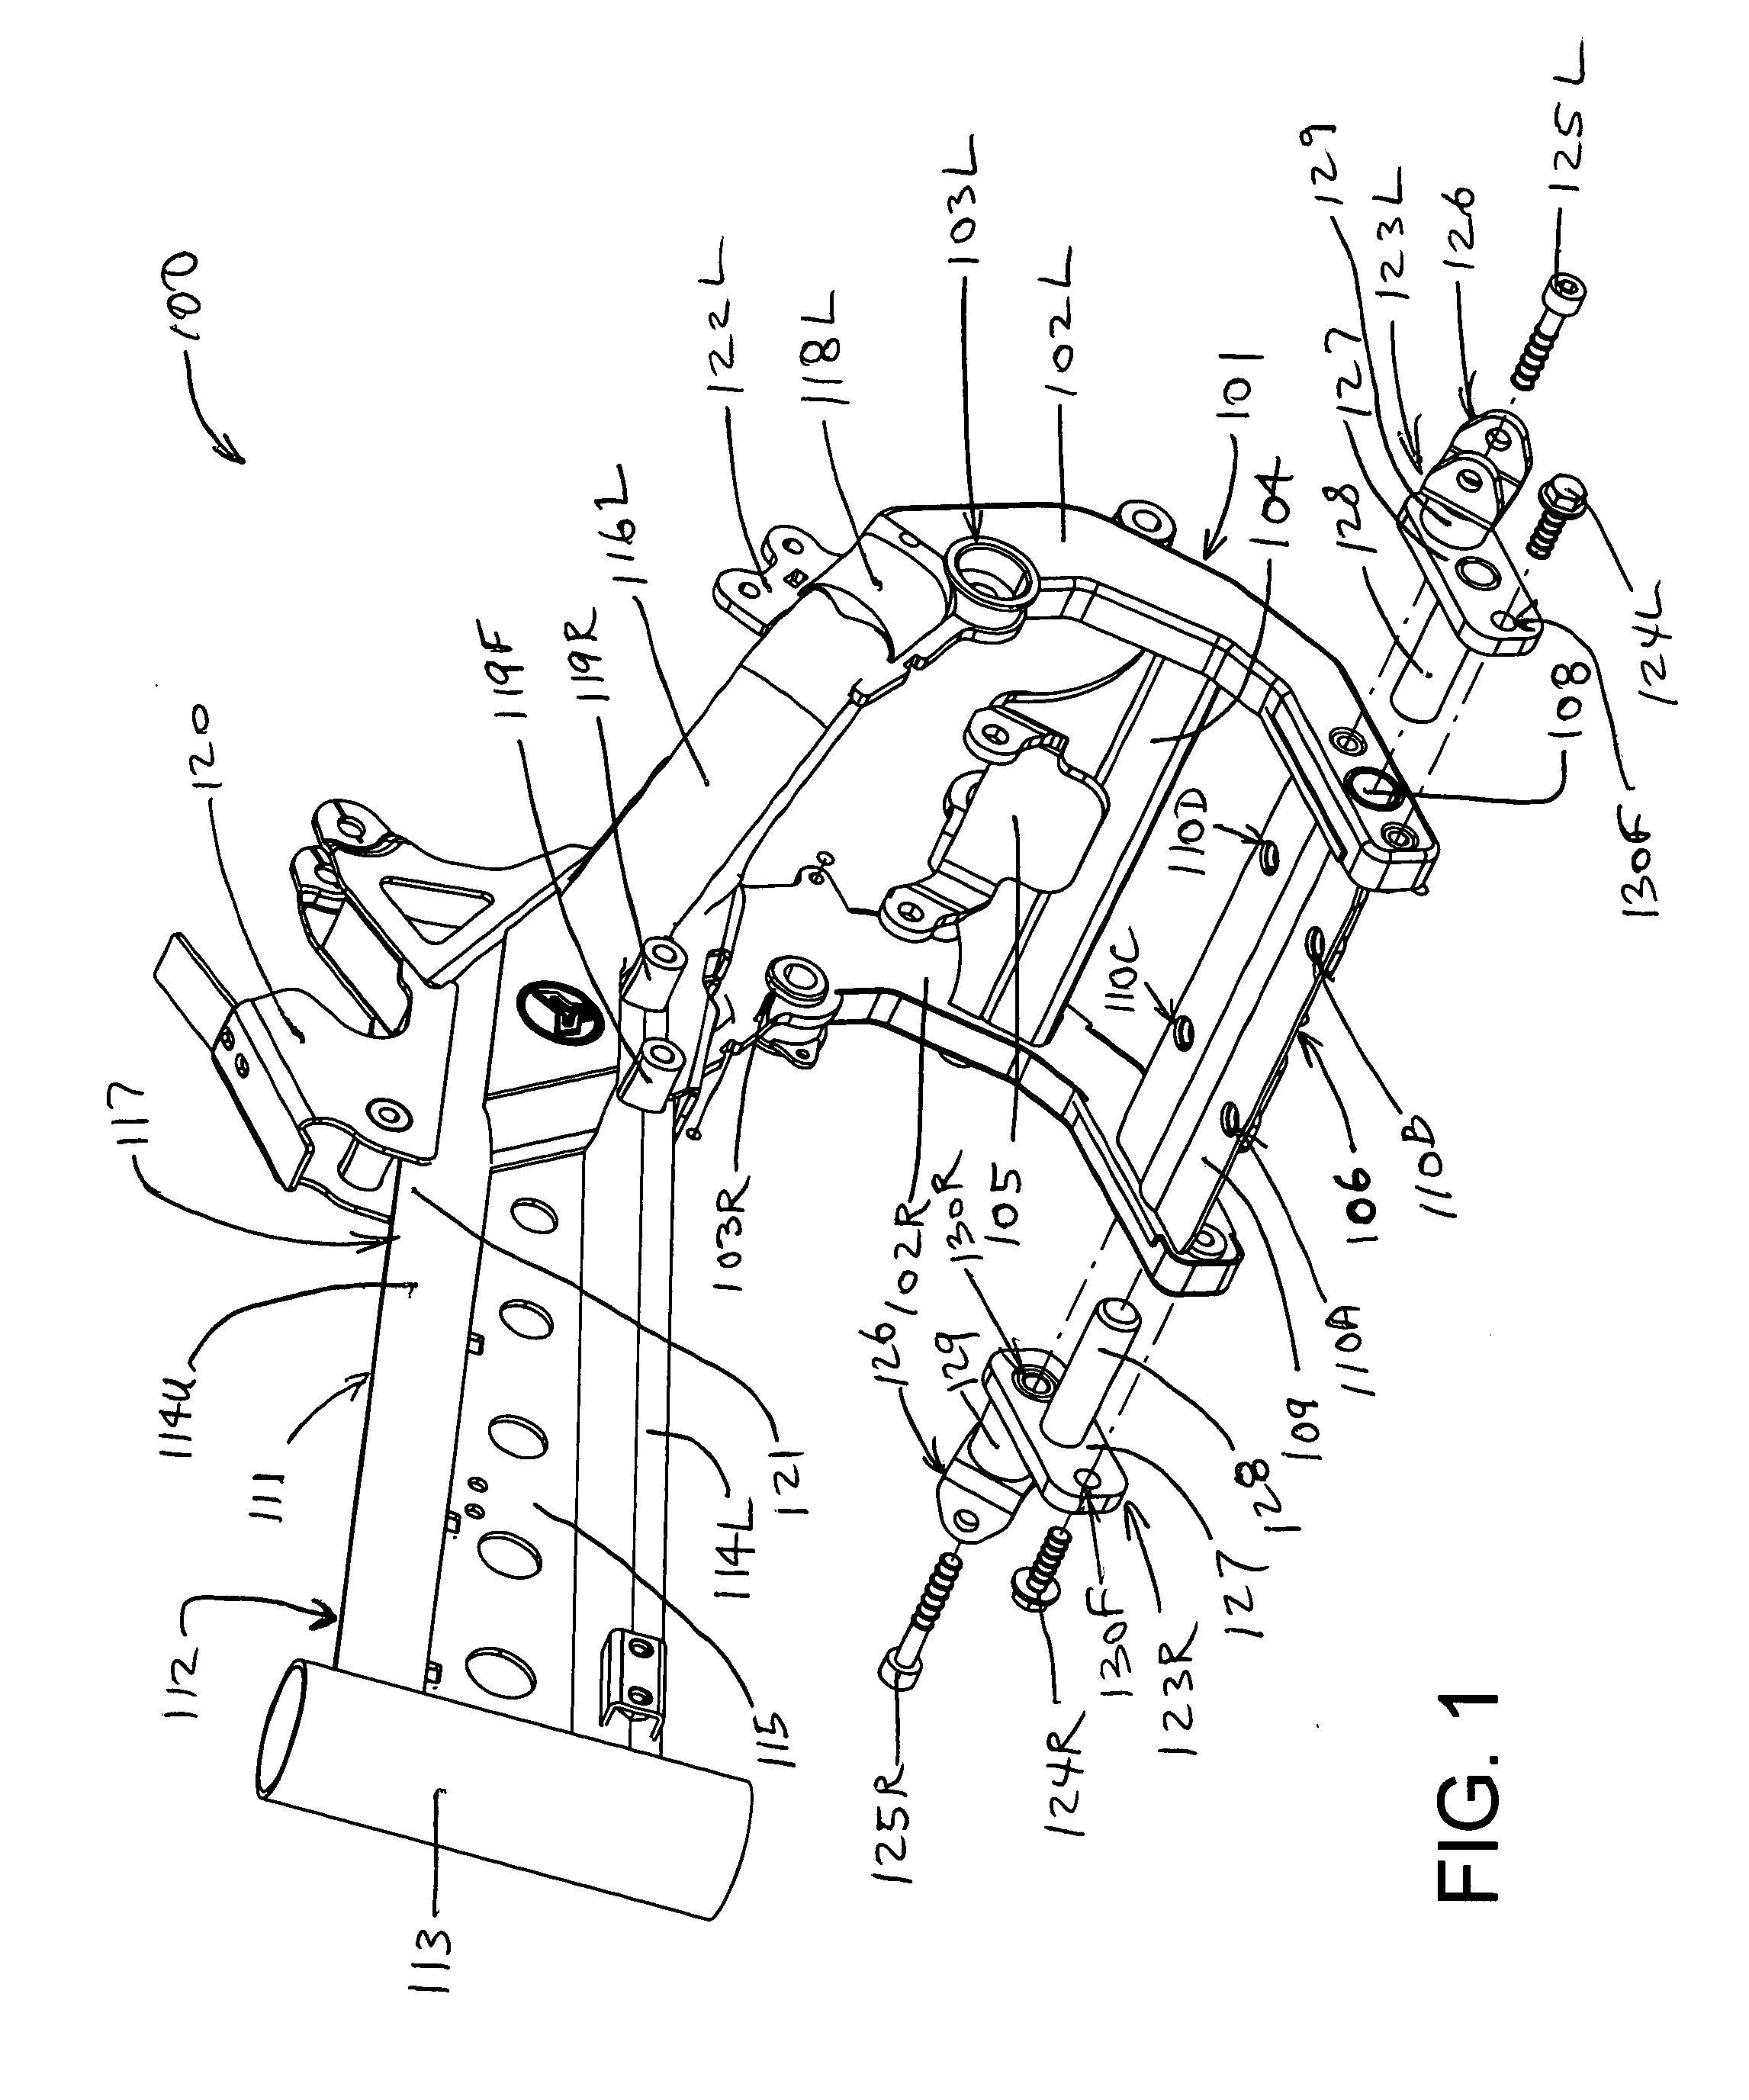 Backbone motorcycle frame having a partial cradle which supports a rear portion of a unitized engine and transmission and to which foot peg assemblies are bolted